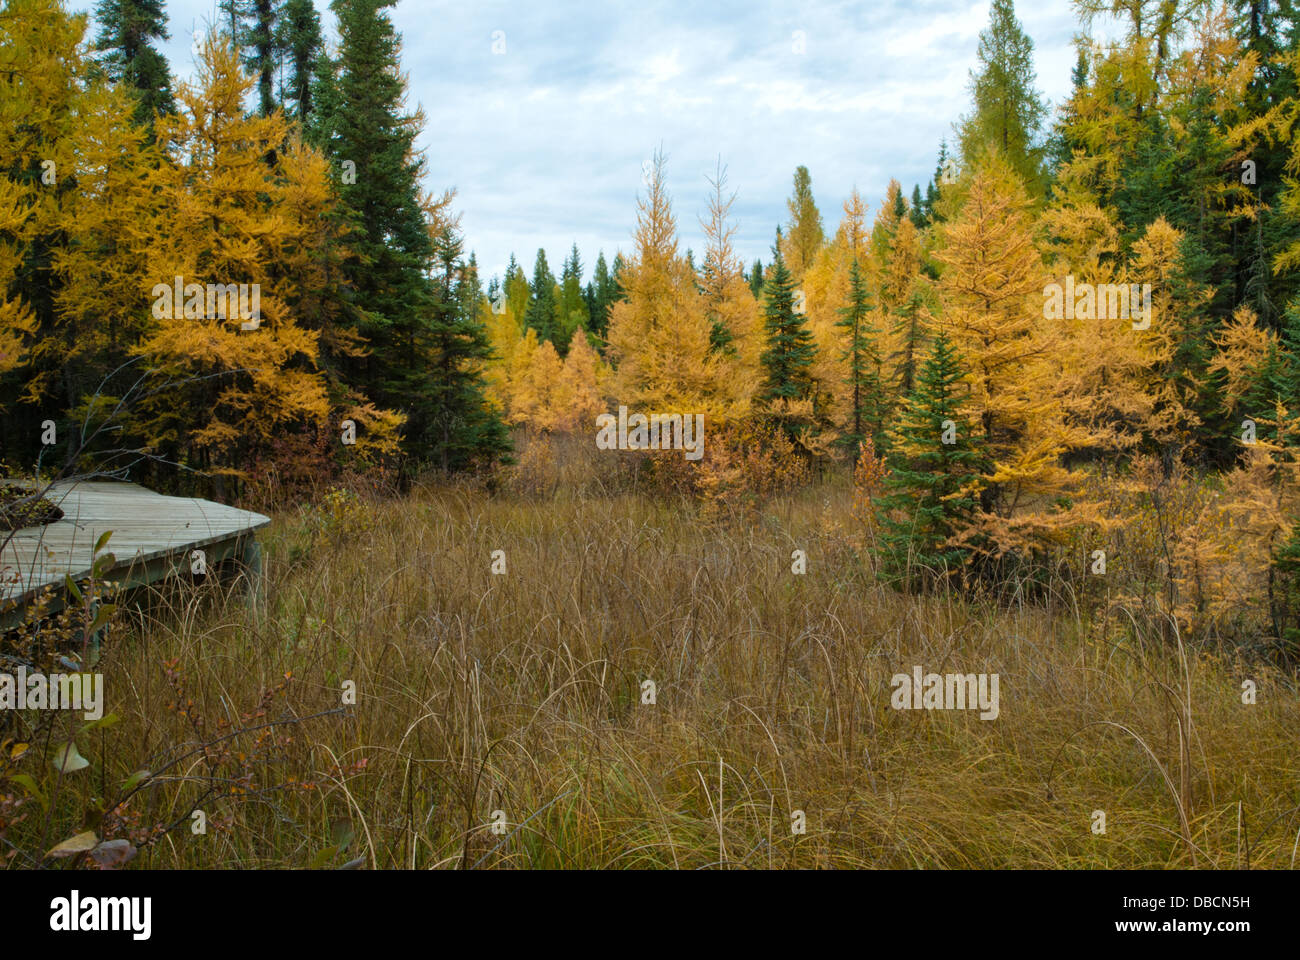 Golden larch trees (Larix laricina) growing around a calcarious bog, with elevated viewing platform, Wagner Bog, Alberta Stock Photo